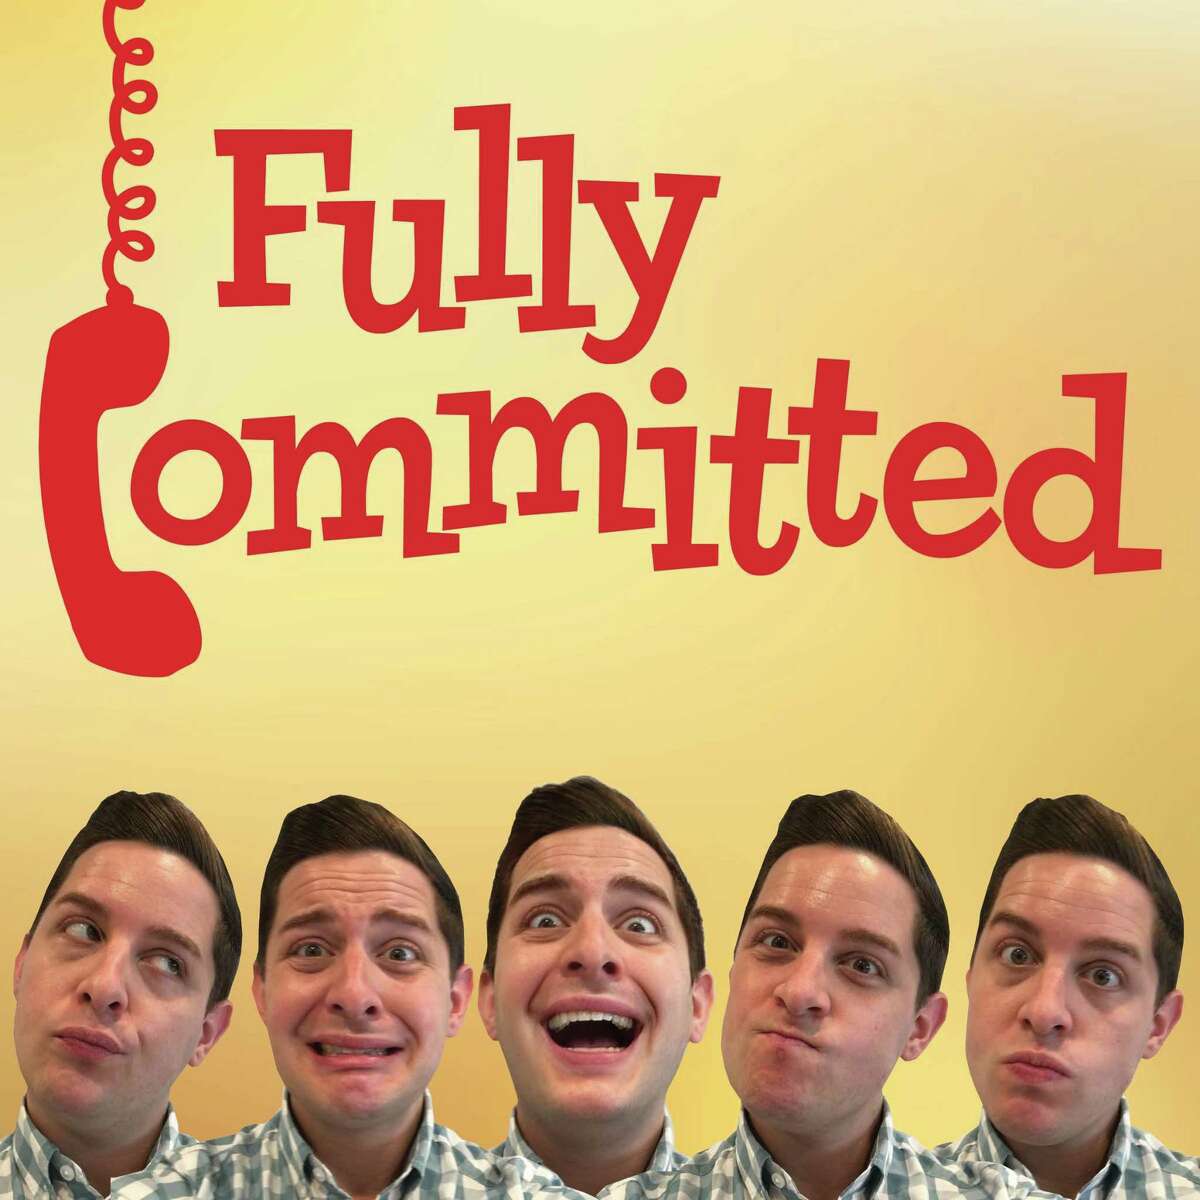 Matt Densky stars in the one-man, one-act comedy, “Fully Committed,” live onstage at Music Theatre of Connecticut in Norwalk, weekends, Sept. 11-27.